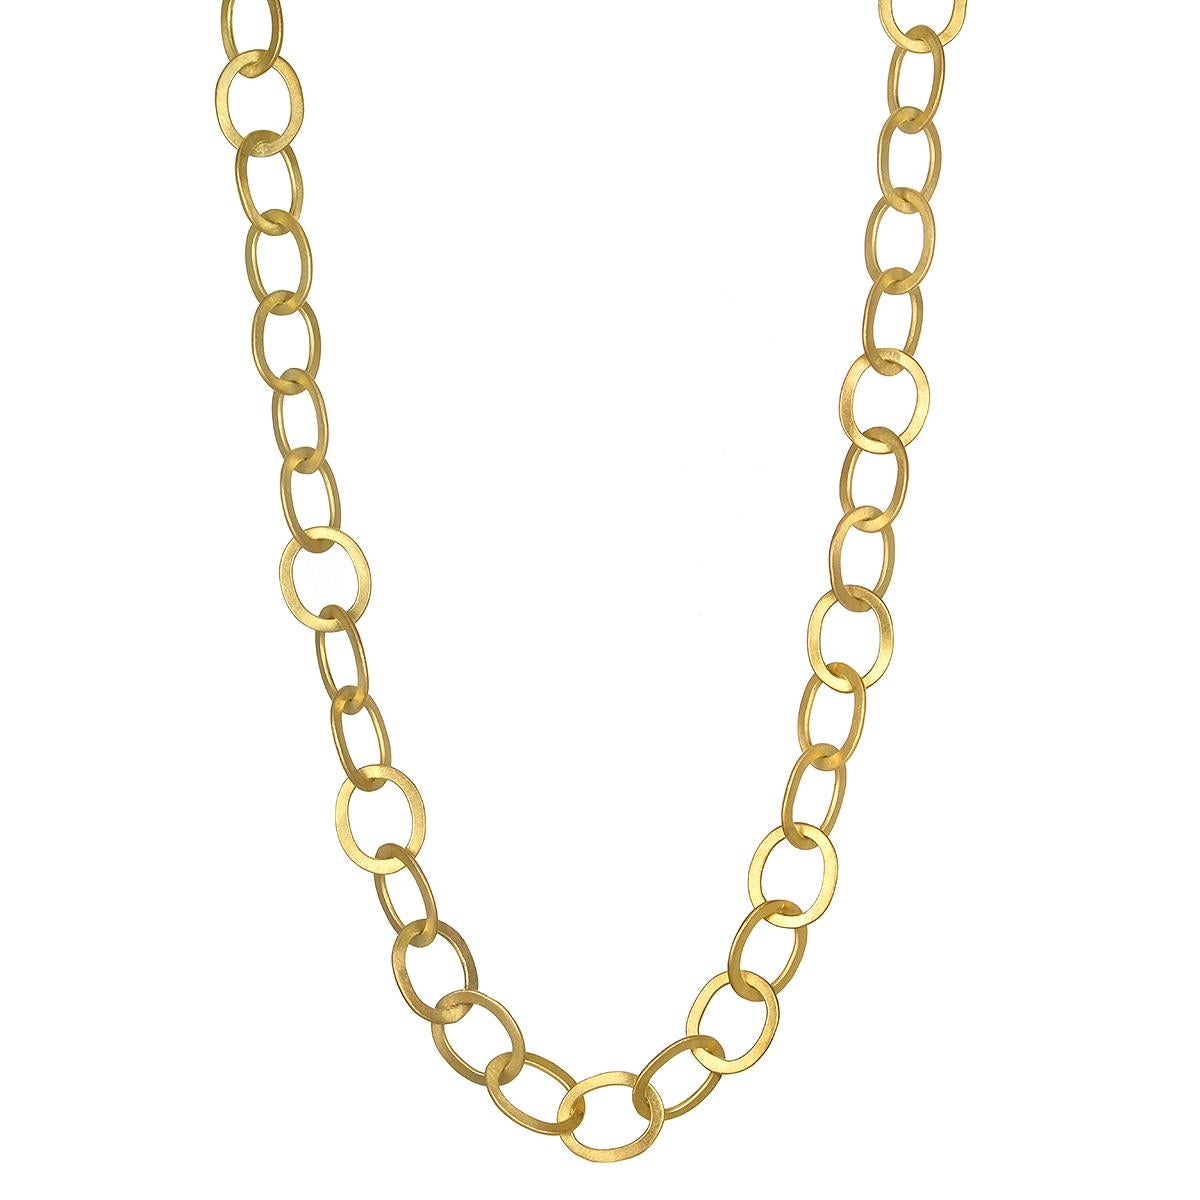 Faye Kim 18 Karat Gold Oval Planished XL Link Chain For Sale 2